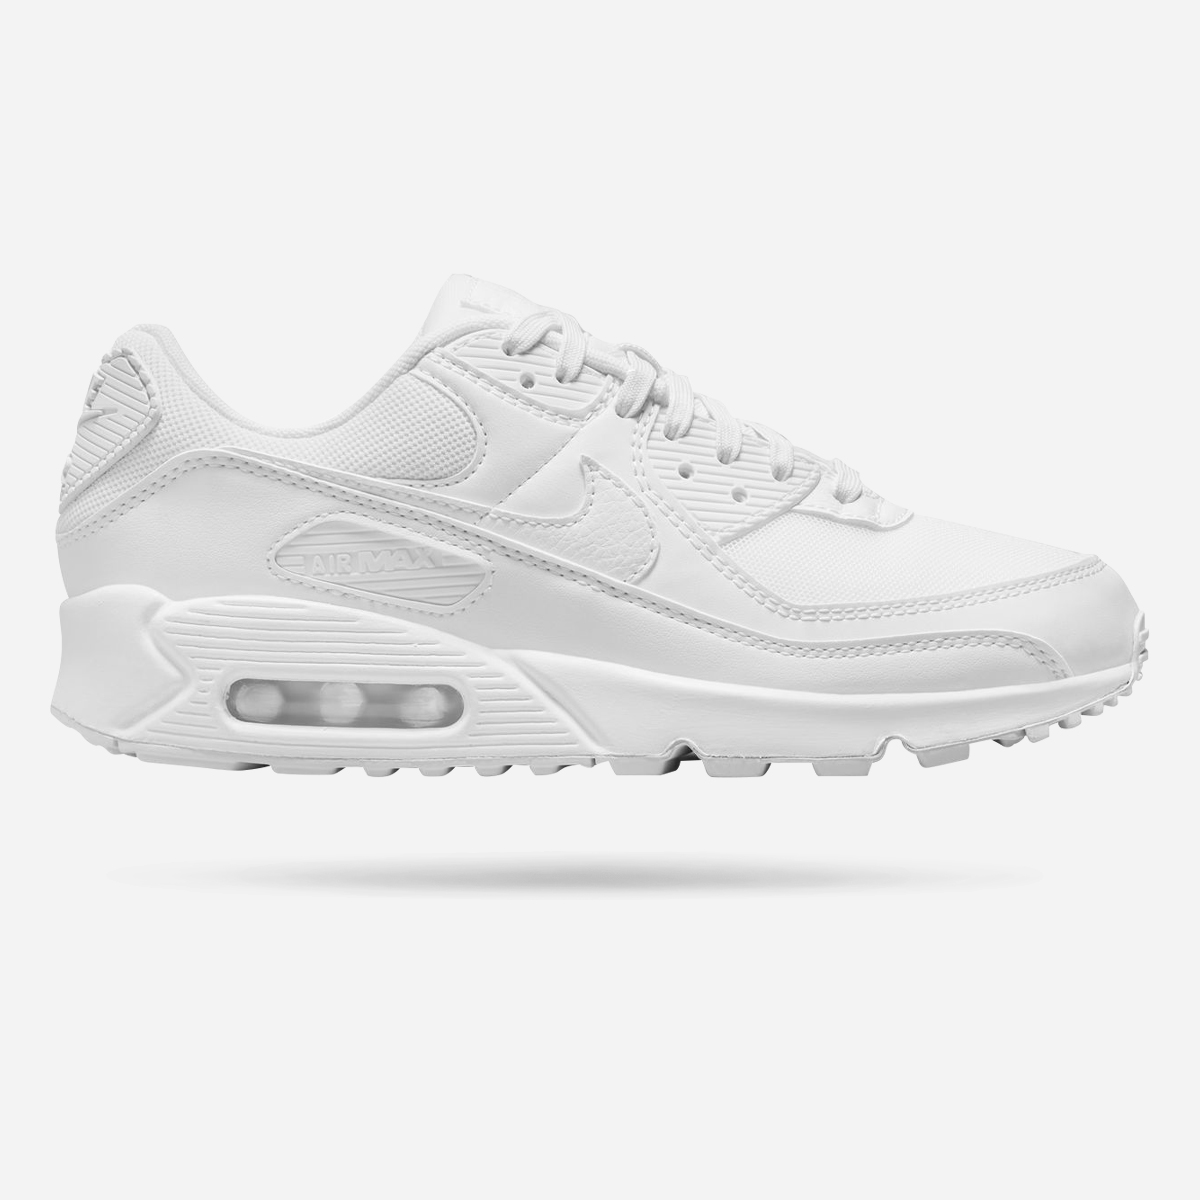 Scepticisme Aanklager pasta Nike Air Max 90 dames sneakers | 36 | 233292